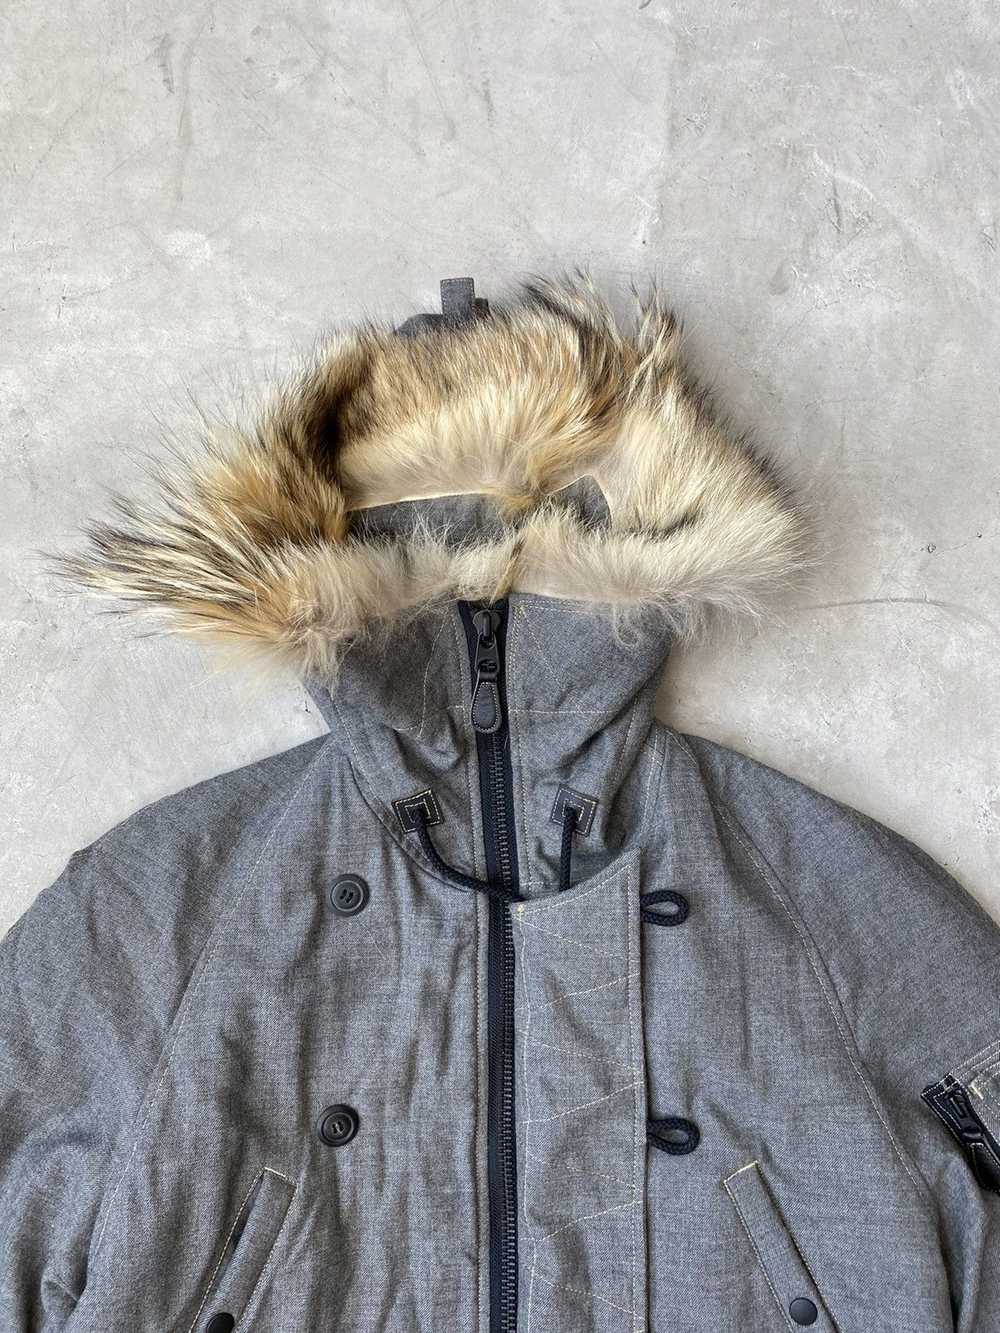 General Research FW/97 General Research Wool Parka - image 4